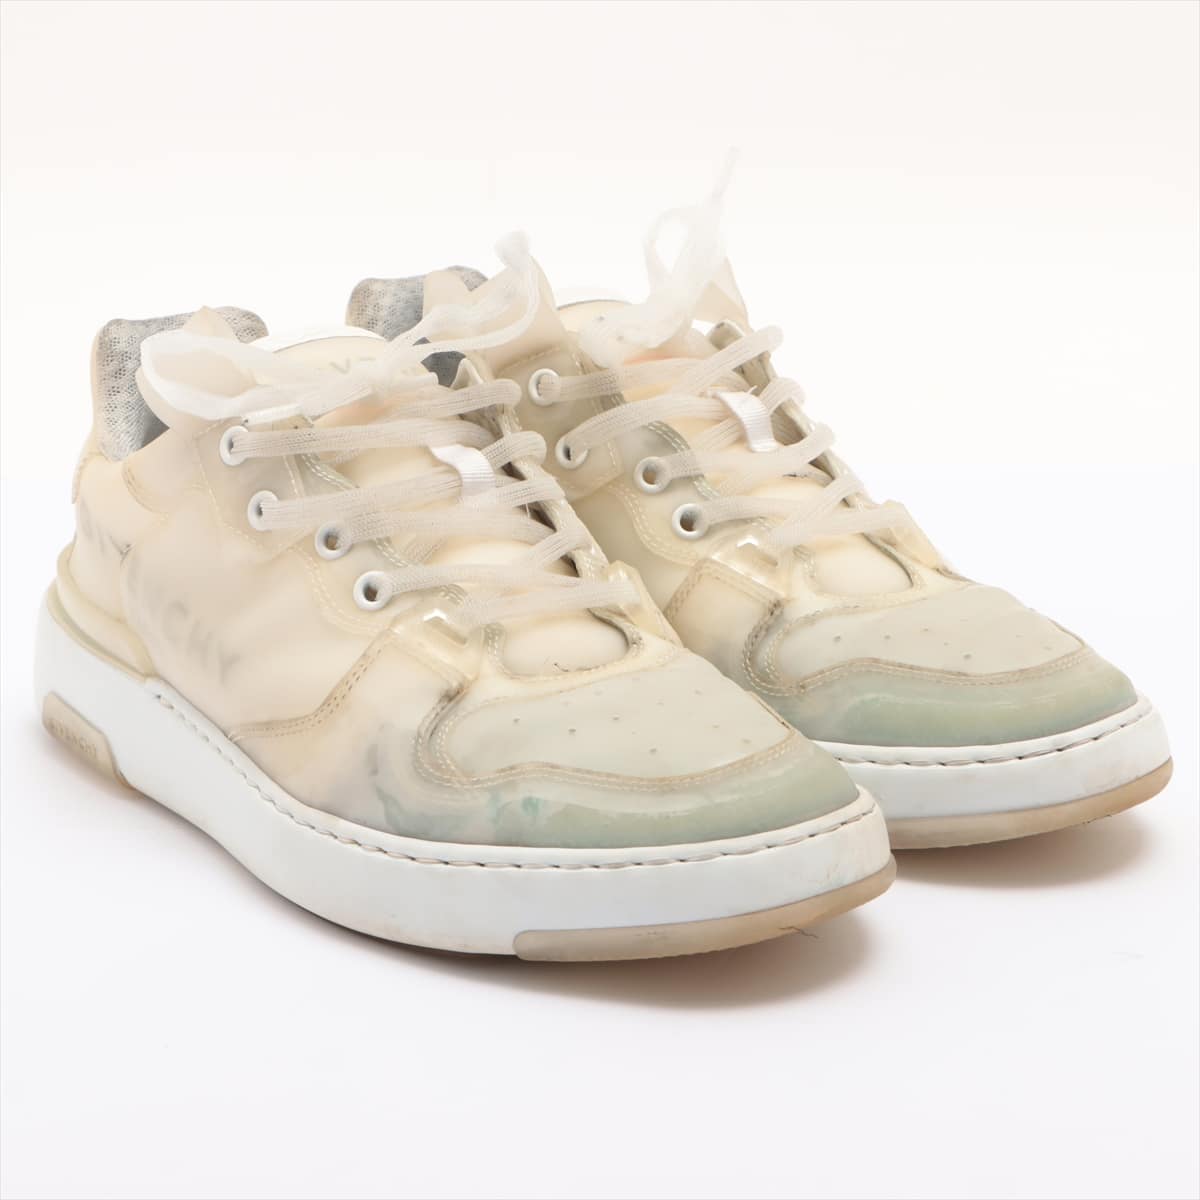 Givenchy Rubber Sneakers 41 Men's White BH002WH0MW